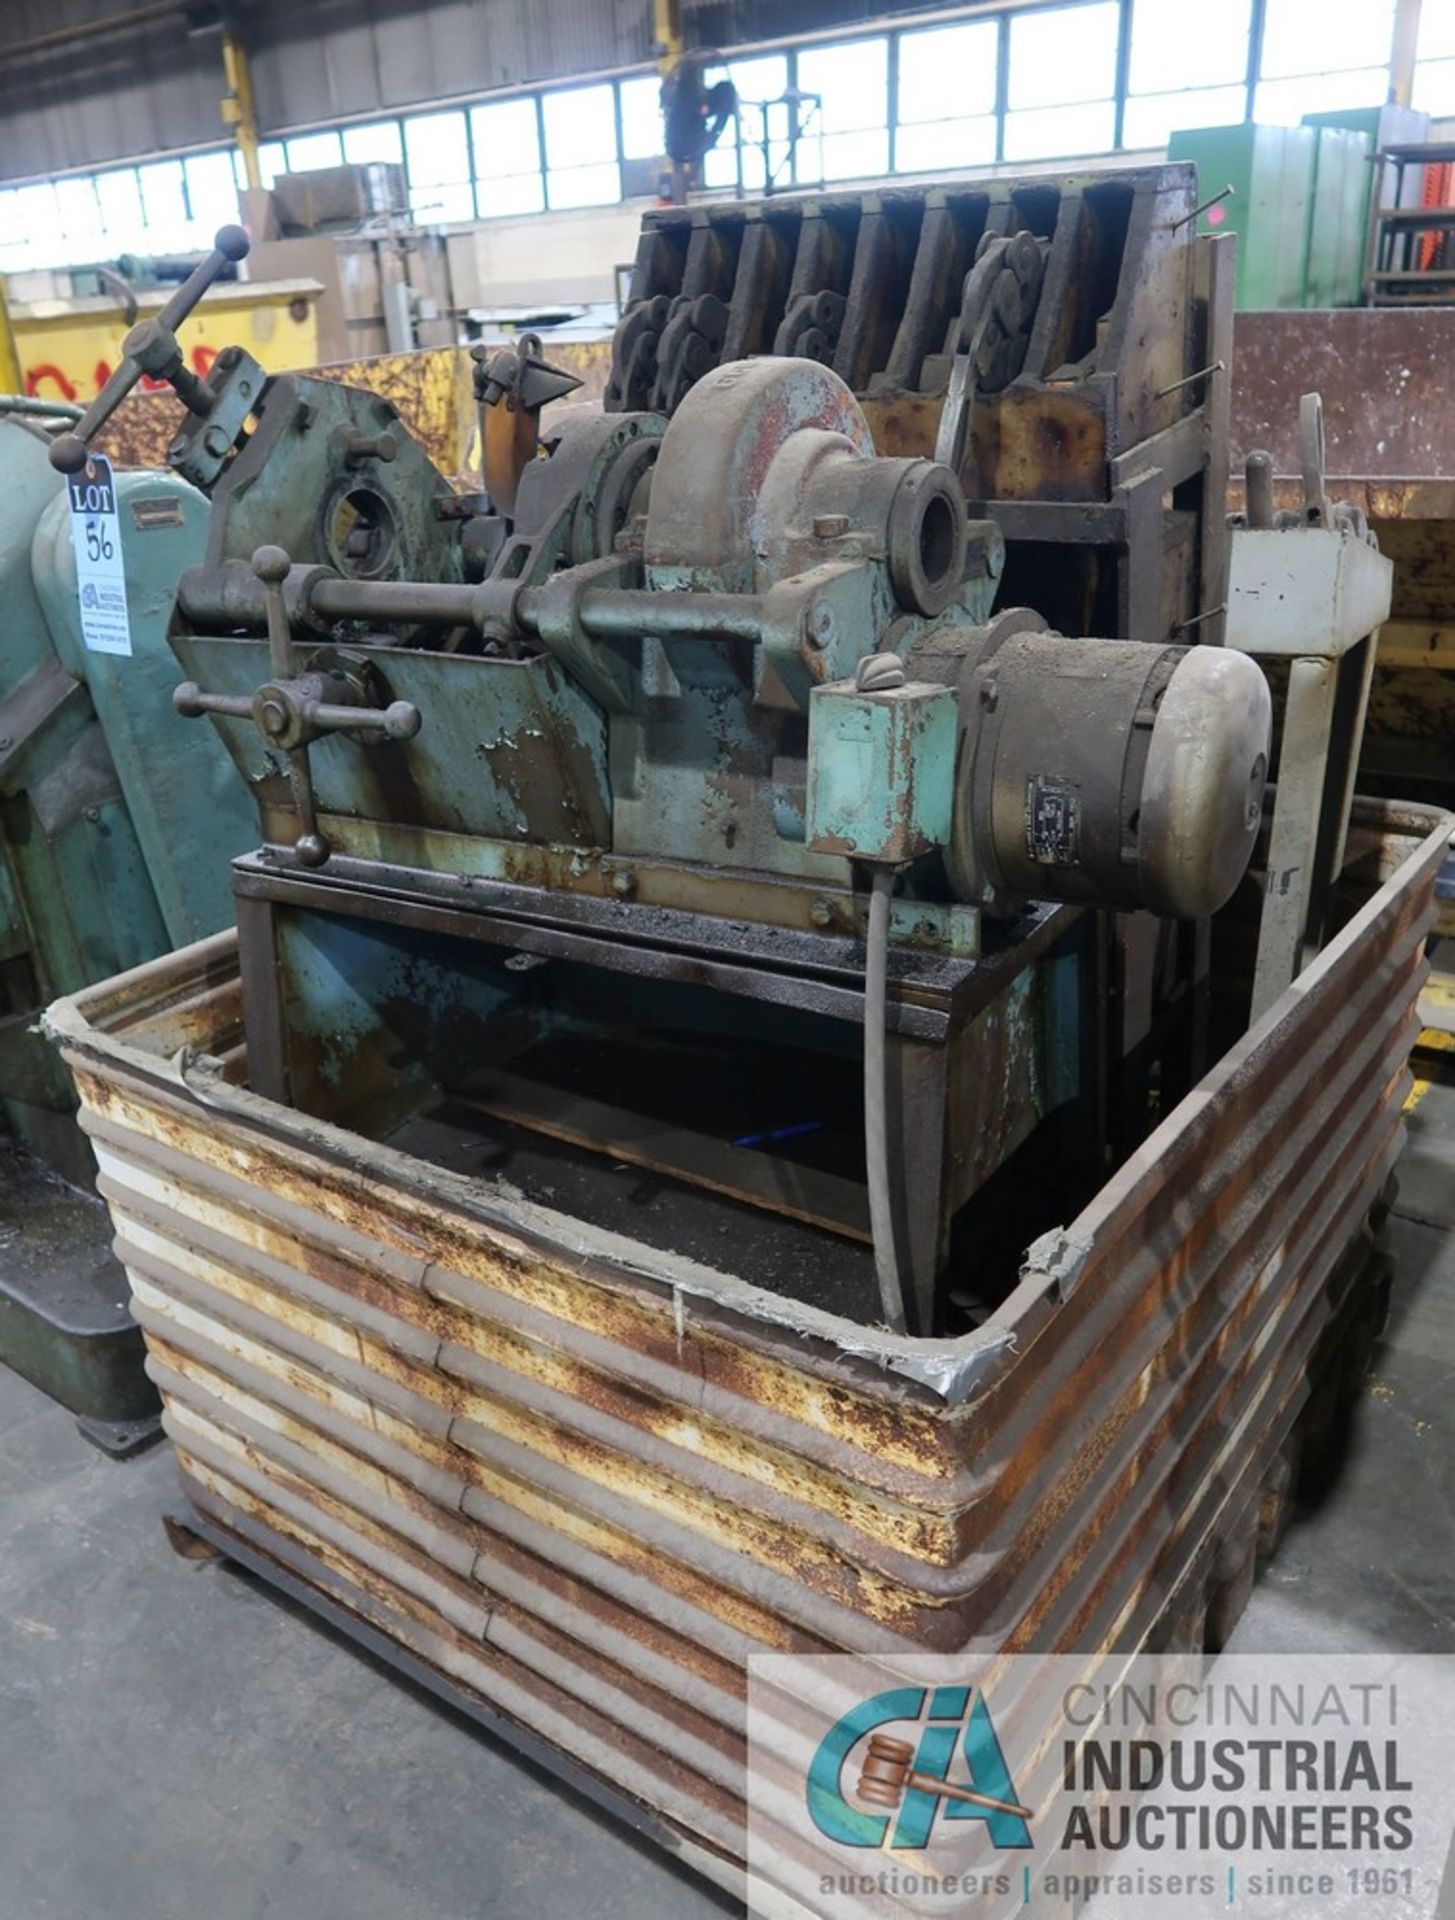 TOLEDO PIPE THREADING MACHINE WITH MISCELLANEOUS THREADING DIES AND CORRUGATED TUB - Image 2 of 4